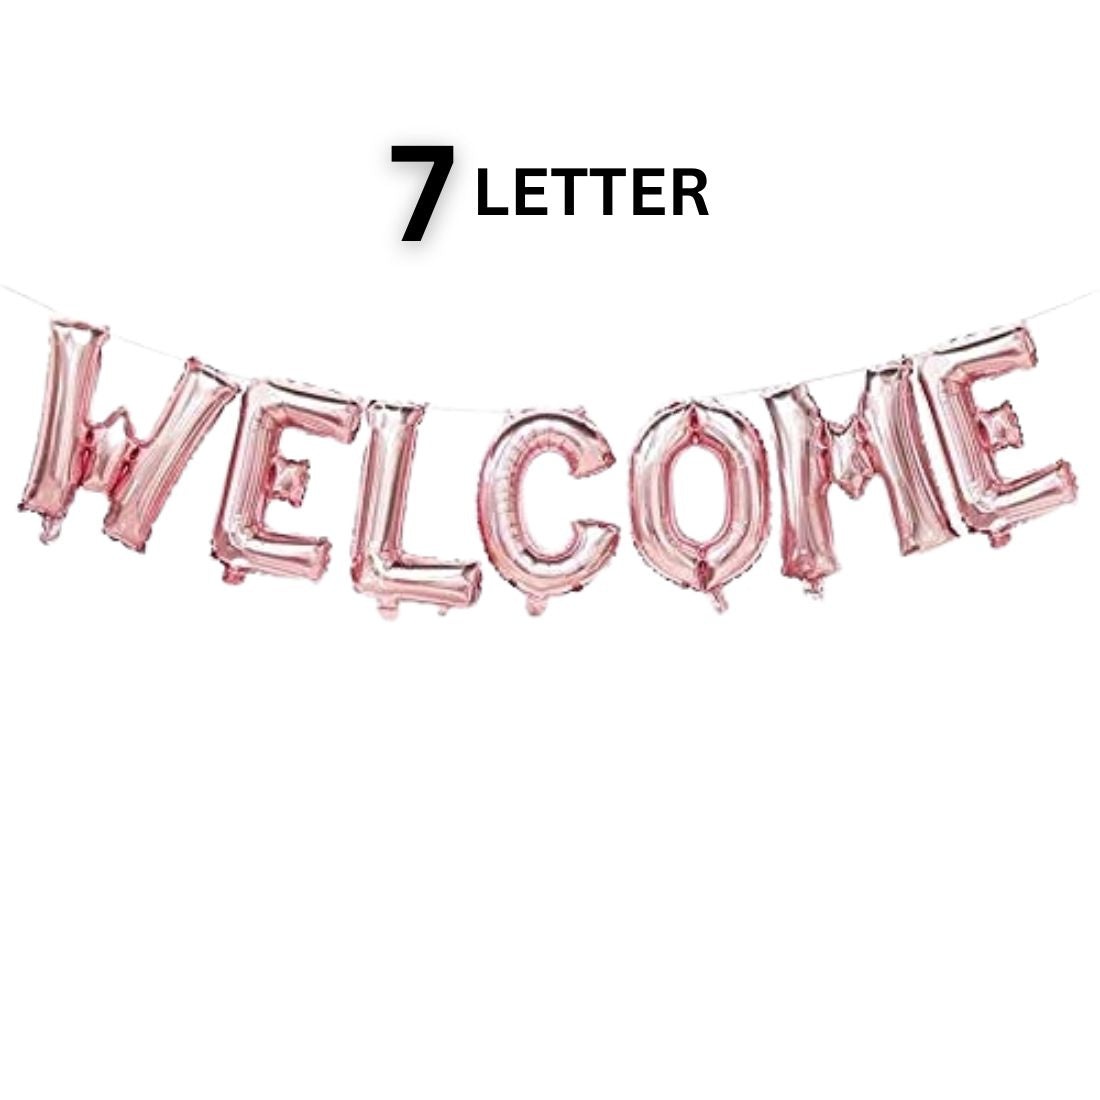 Welcome Letter Foil Balloon/ Anniversary Party Decoration Items – Rose Gold